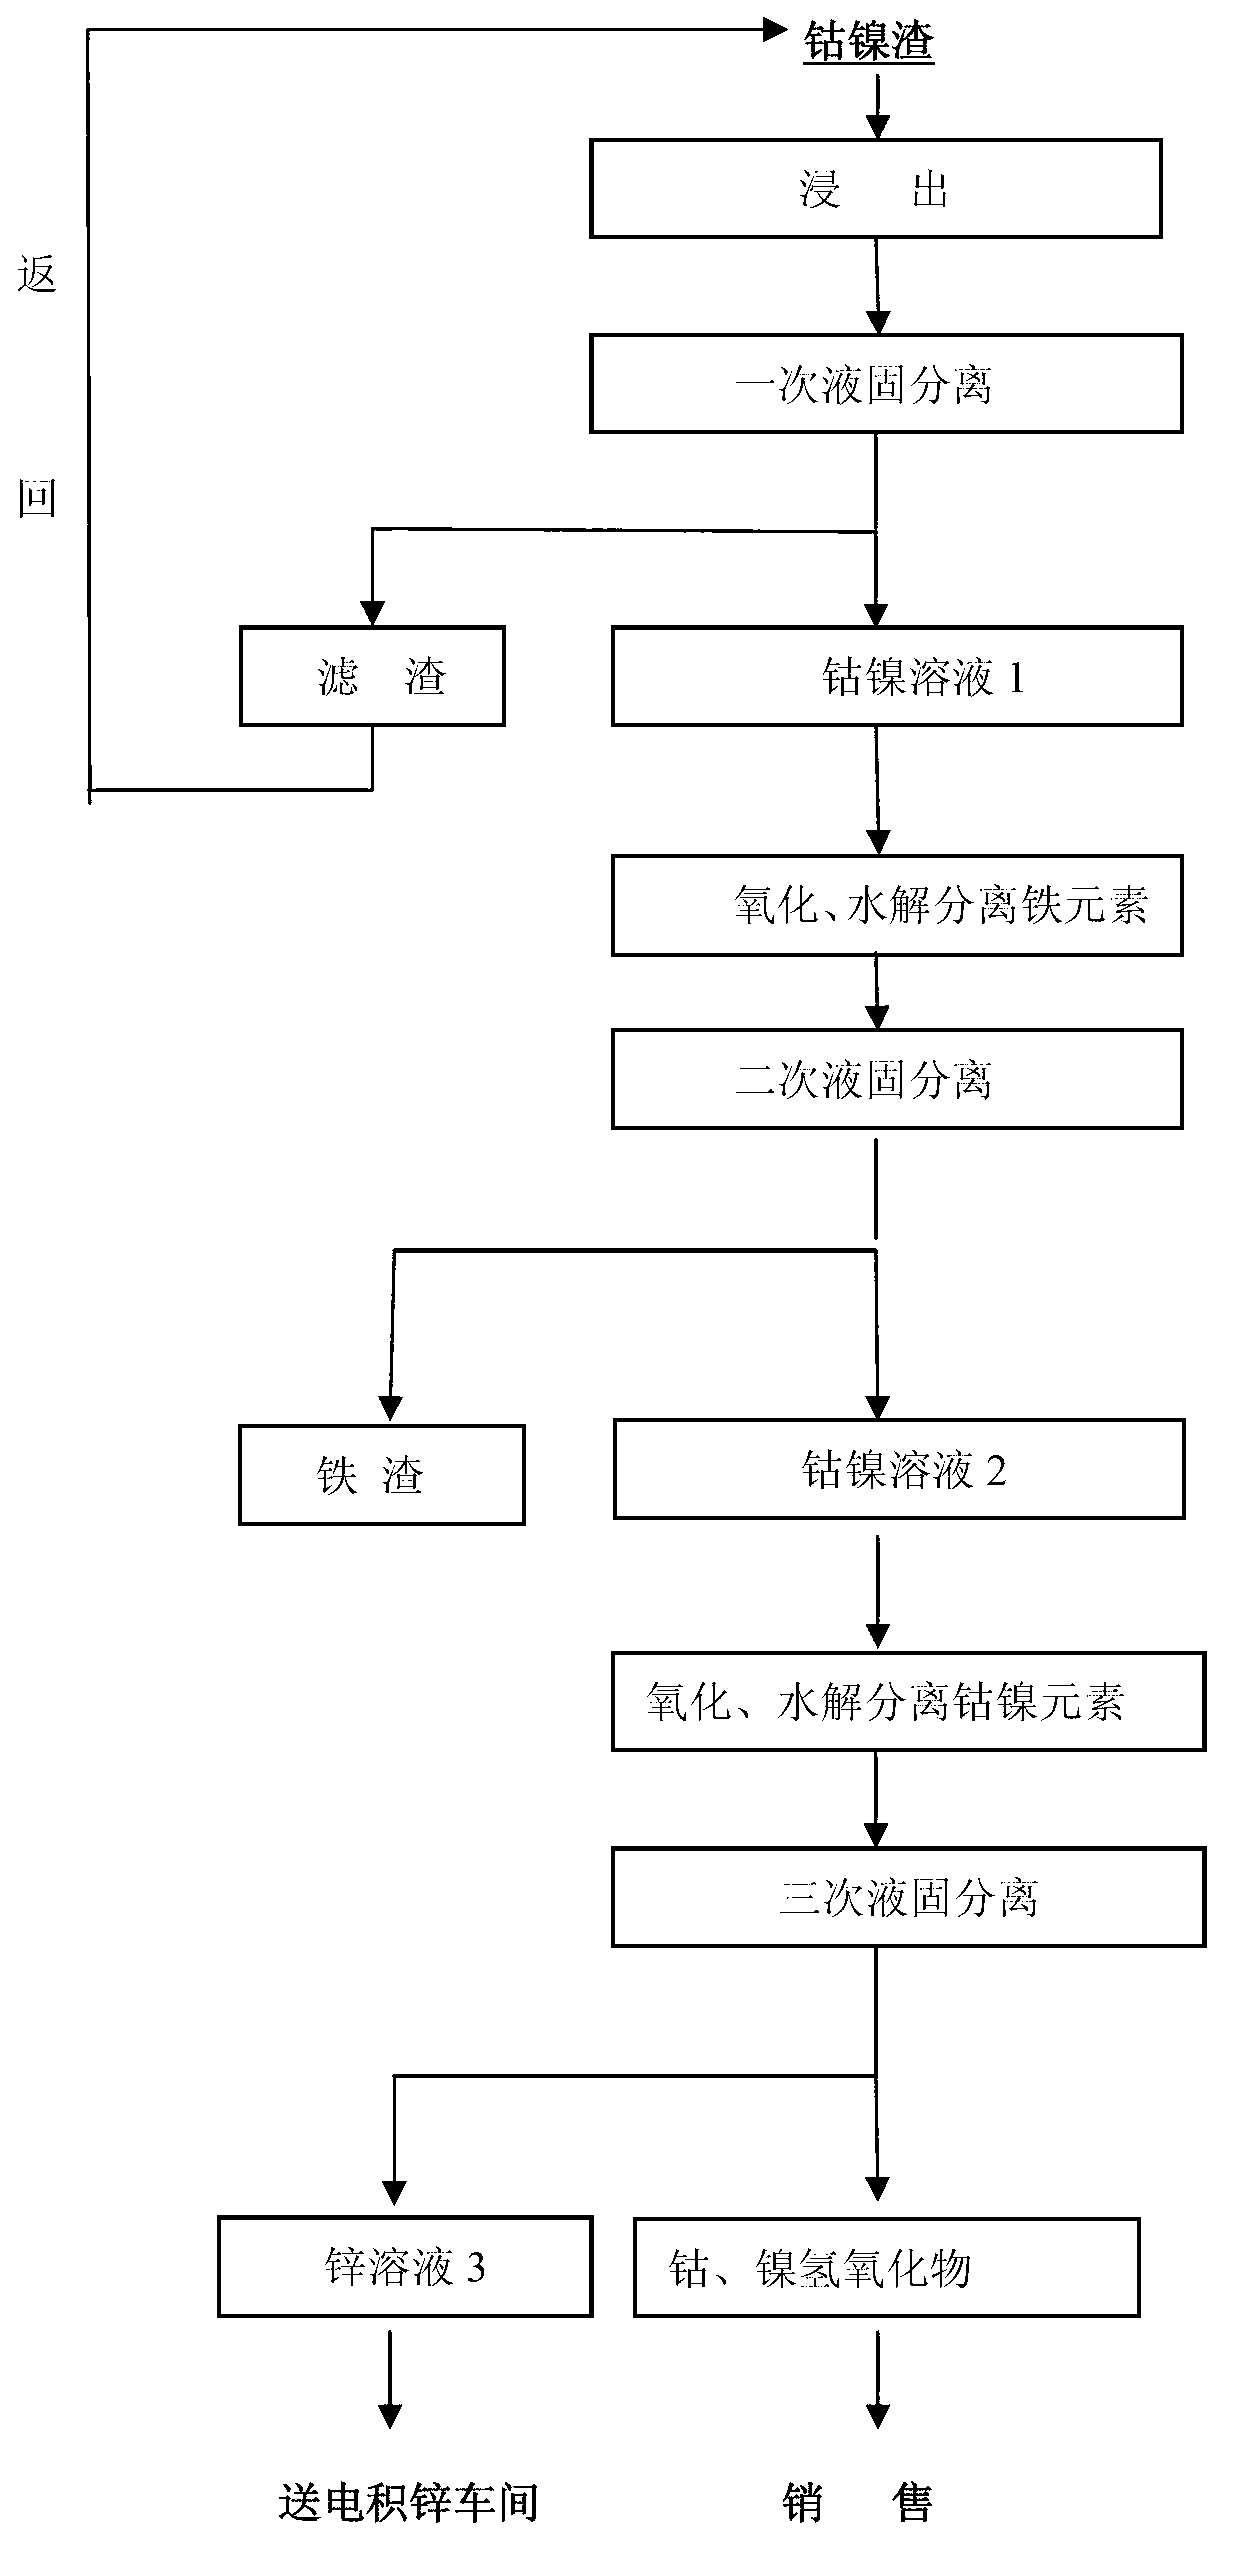 Process method for separating zinc, iron and cobalt and nickel ore concentrates from cobalt and nickel slag